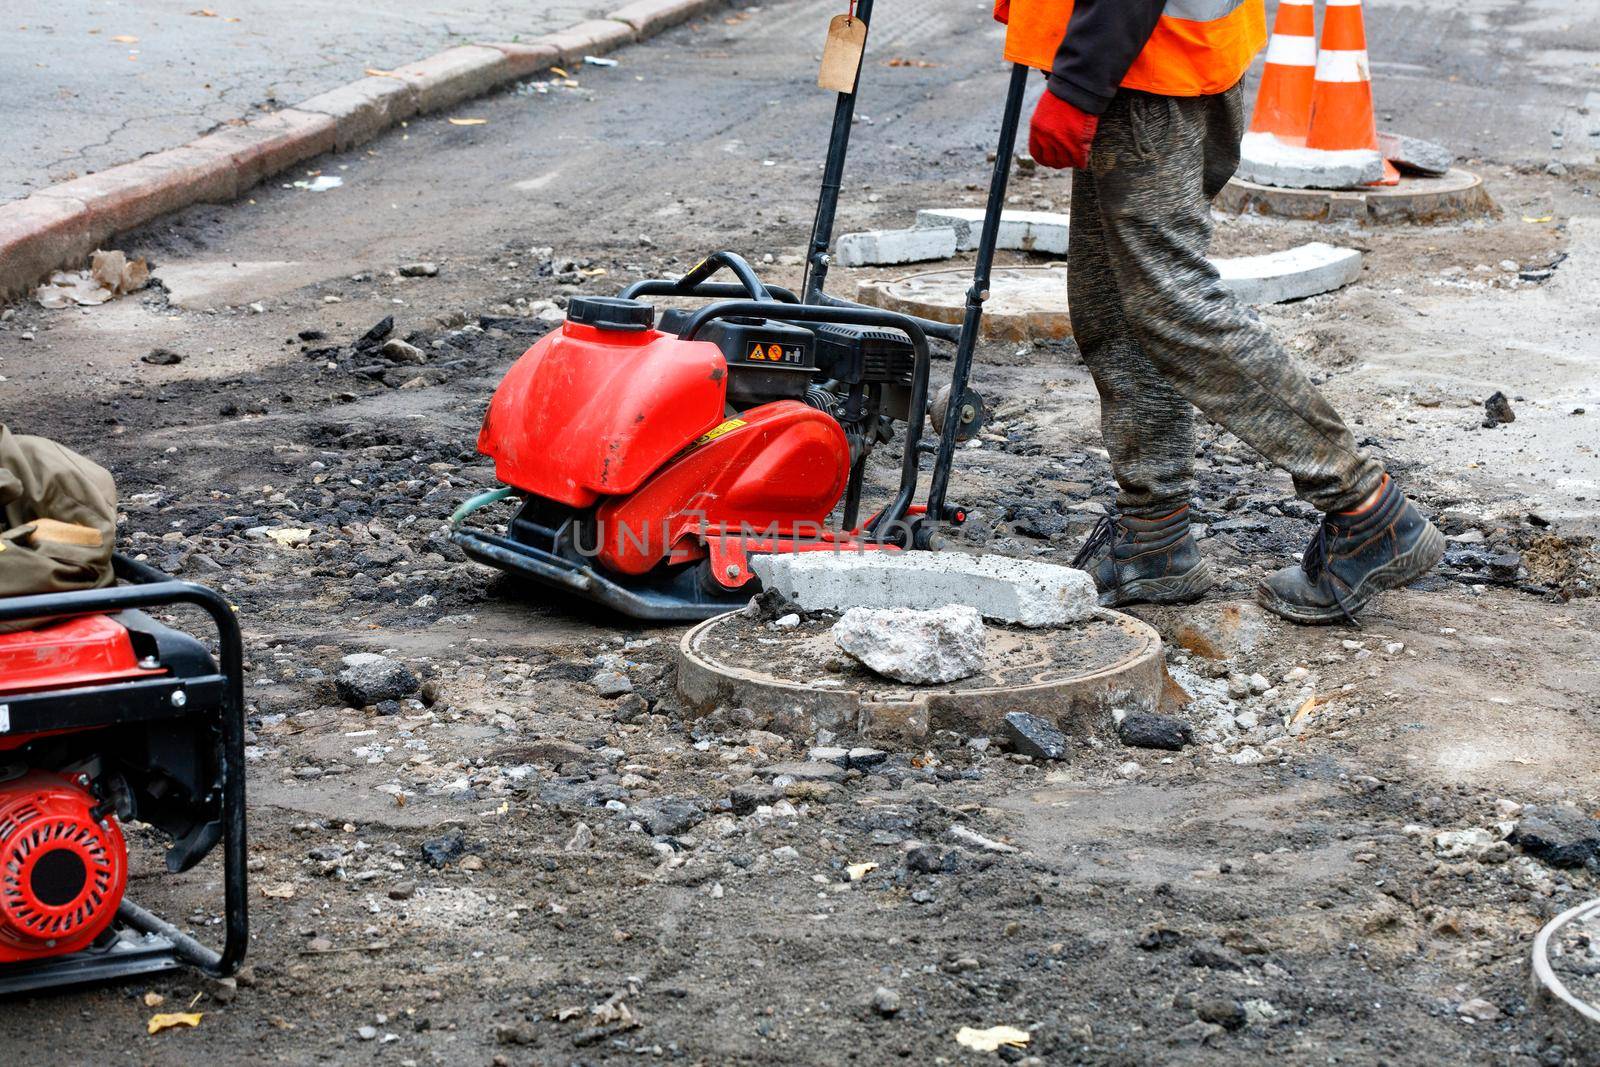 A road worker wearing a reflective orange vest repairs and installs sewers using a compactor plate, an electric jackhammer and a petrol generator on a roadway surrounded by red cones. Copy space.